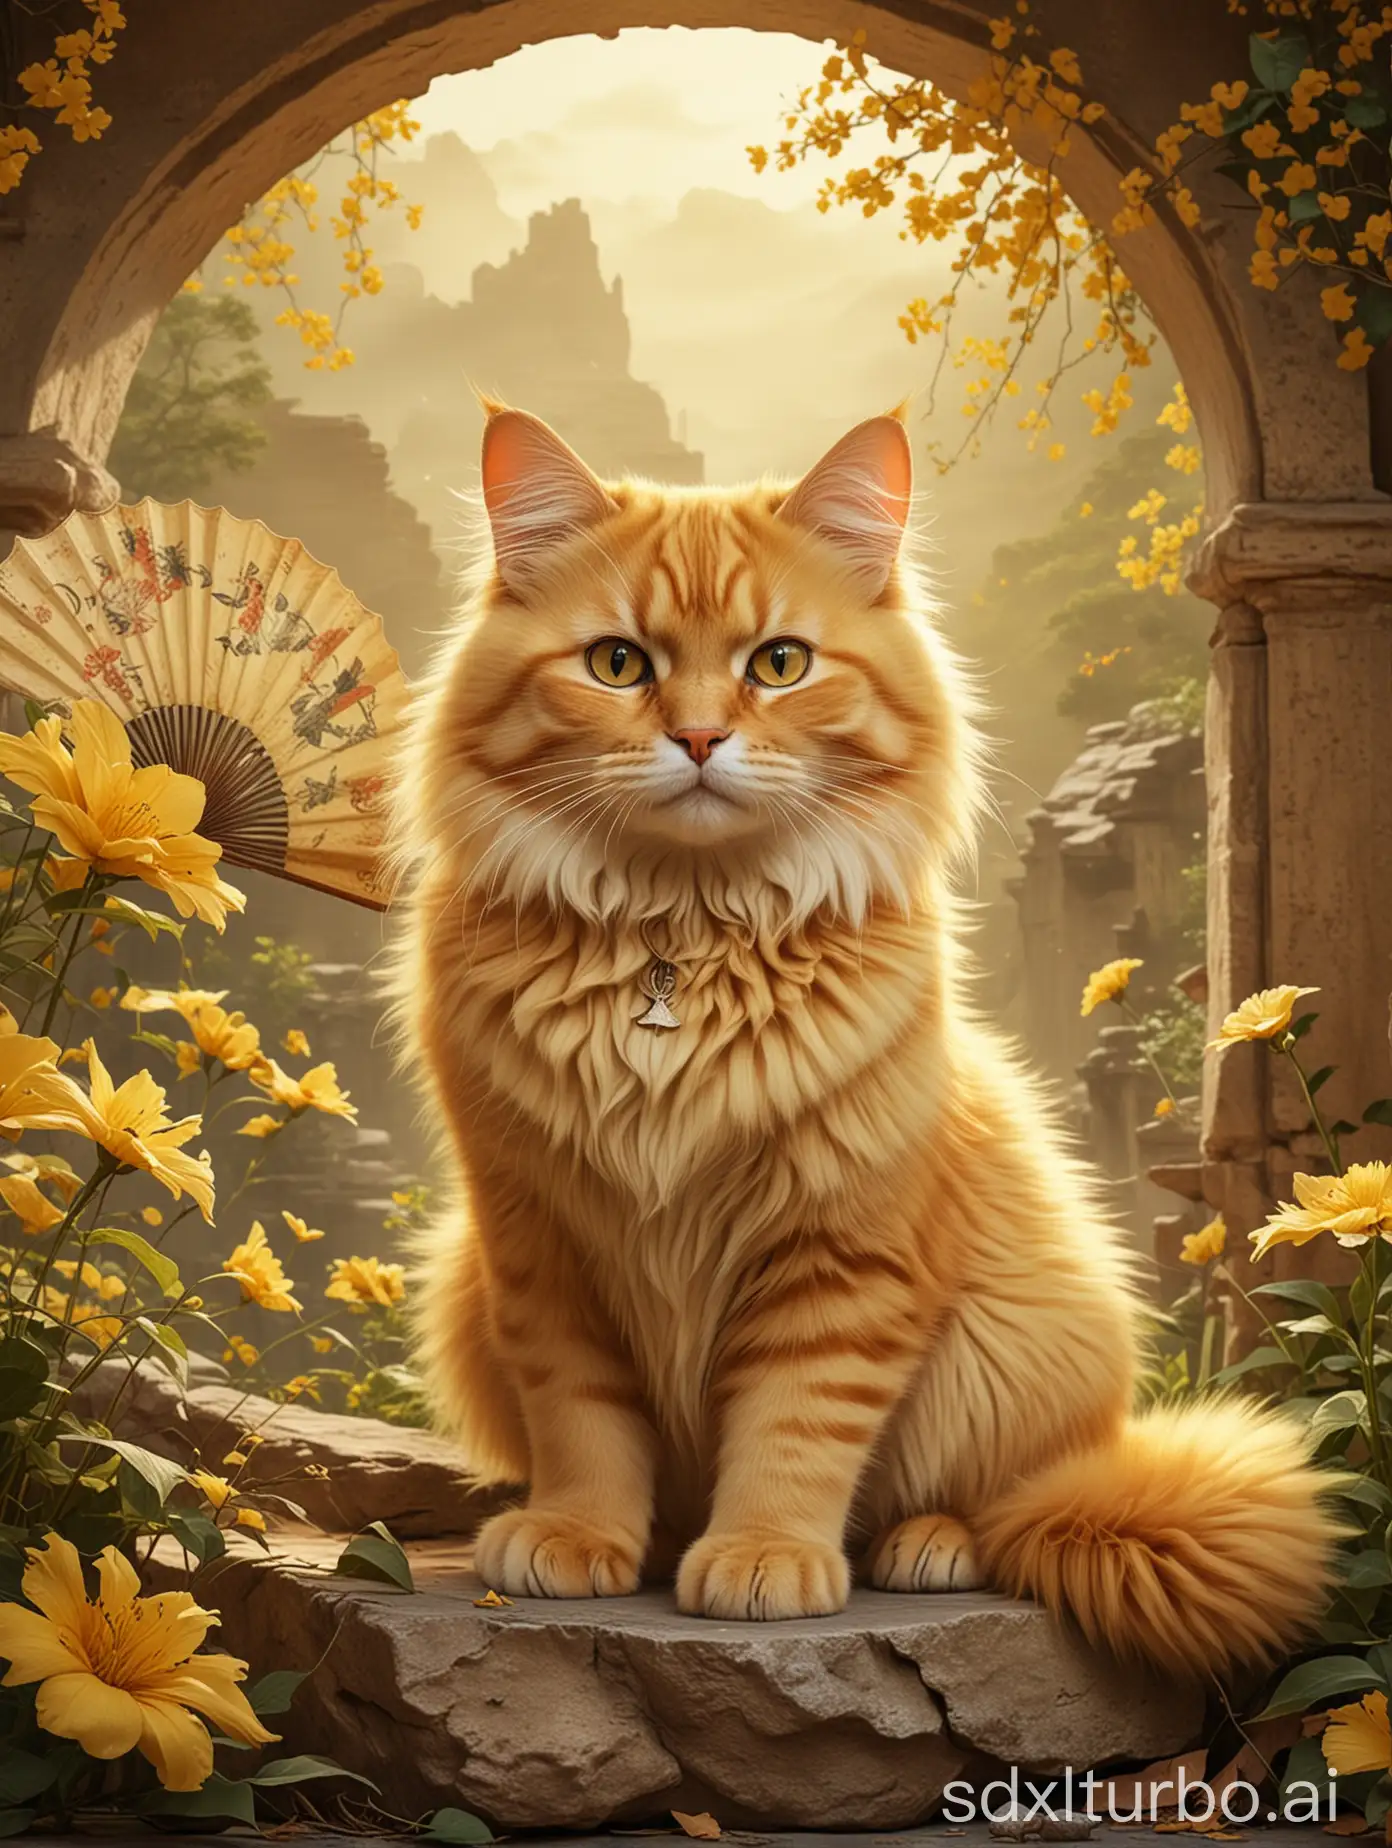 wallpaper, create 1 panel of fan art with a fluffy yellow cat, ancient style